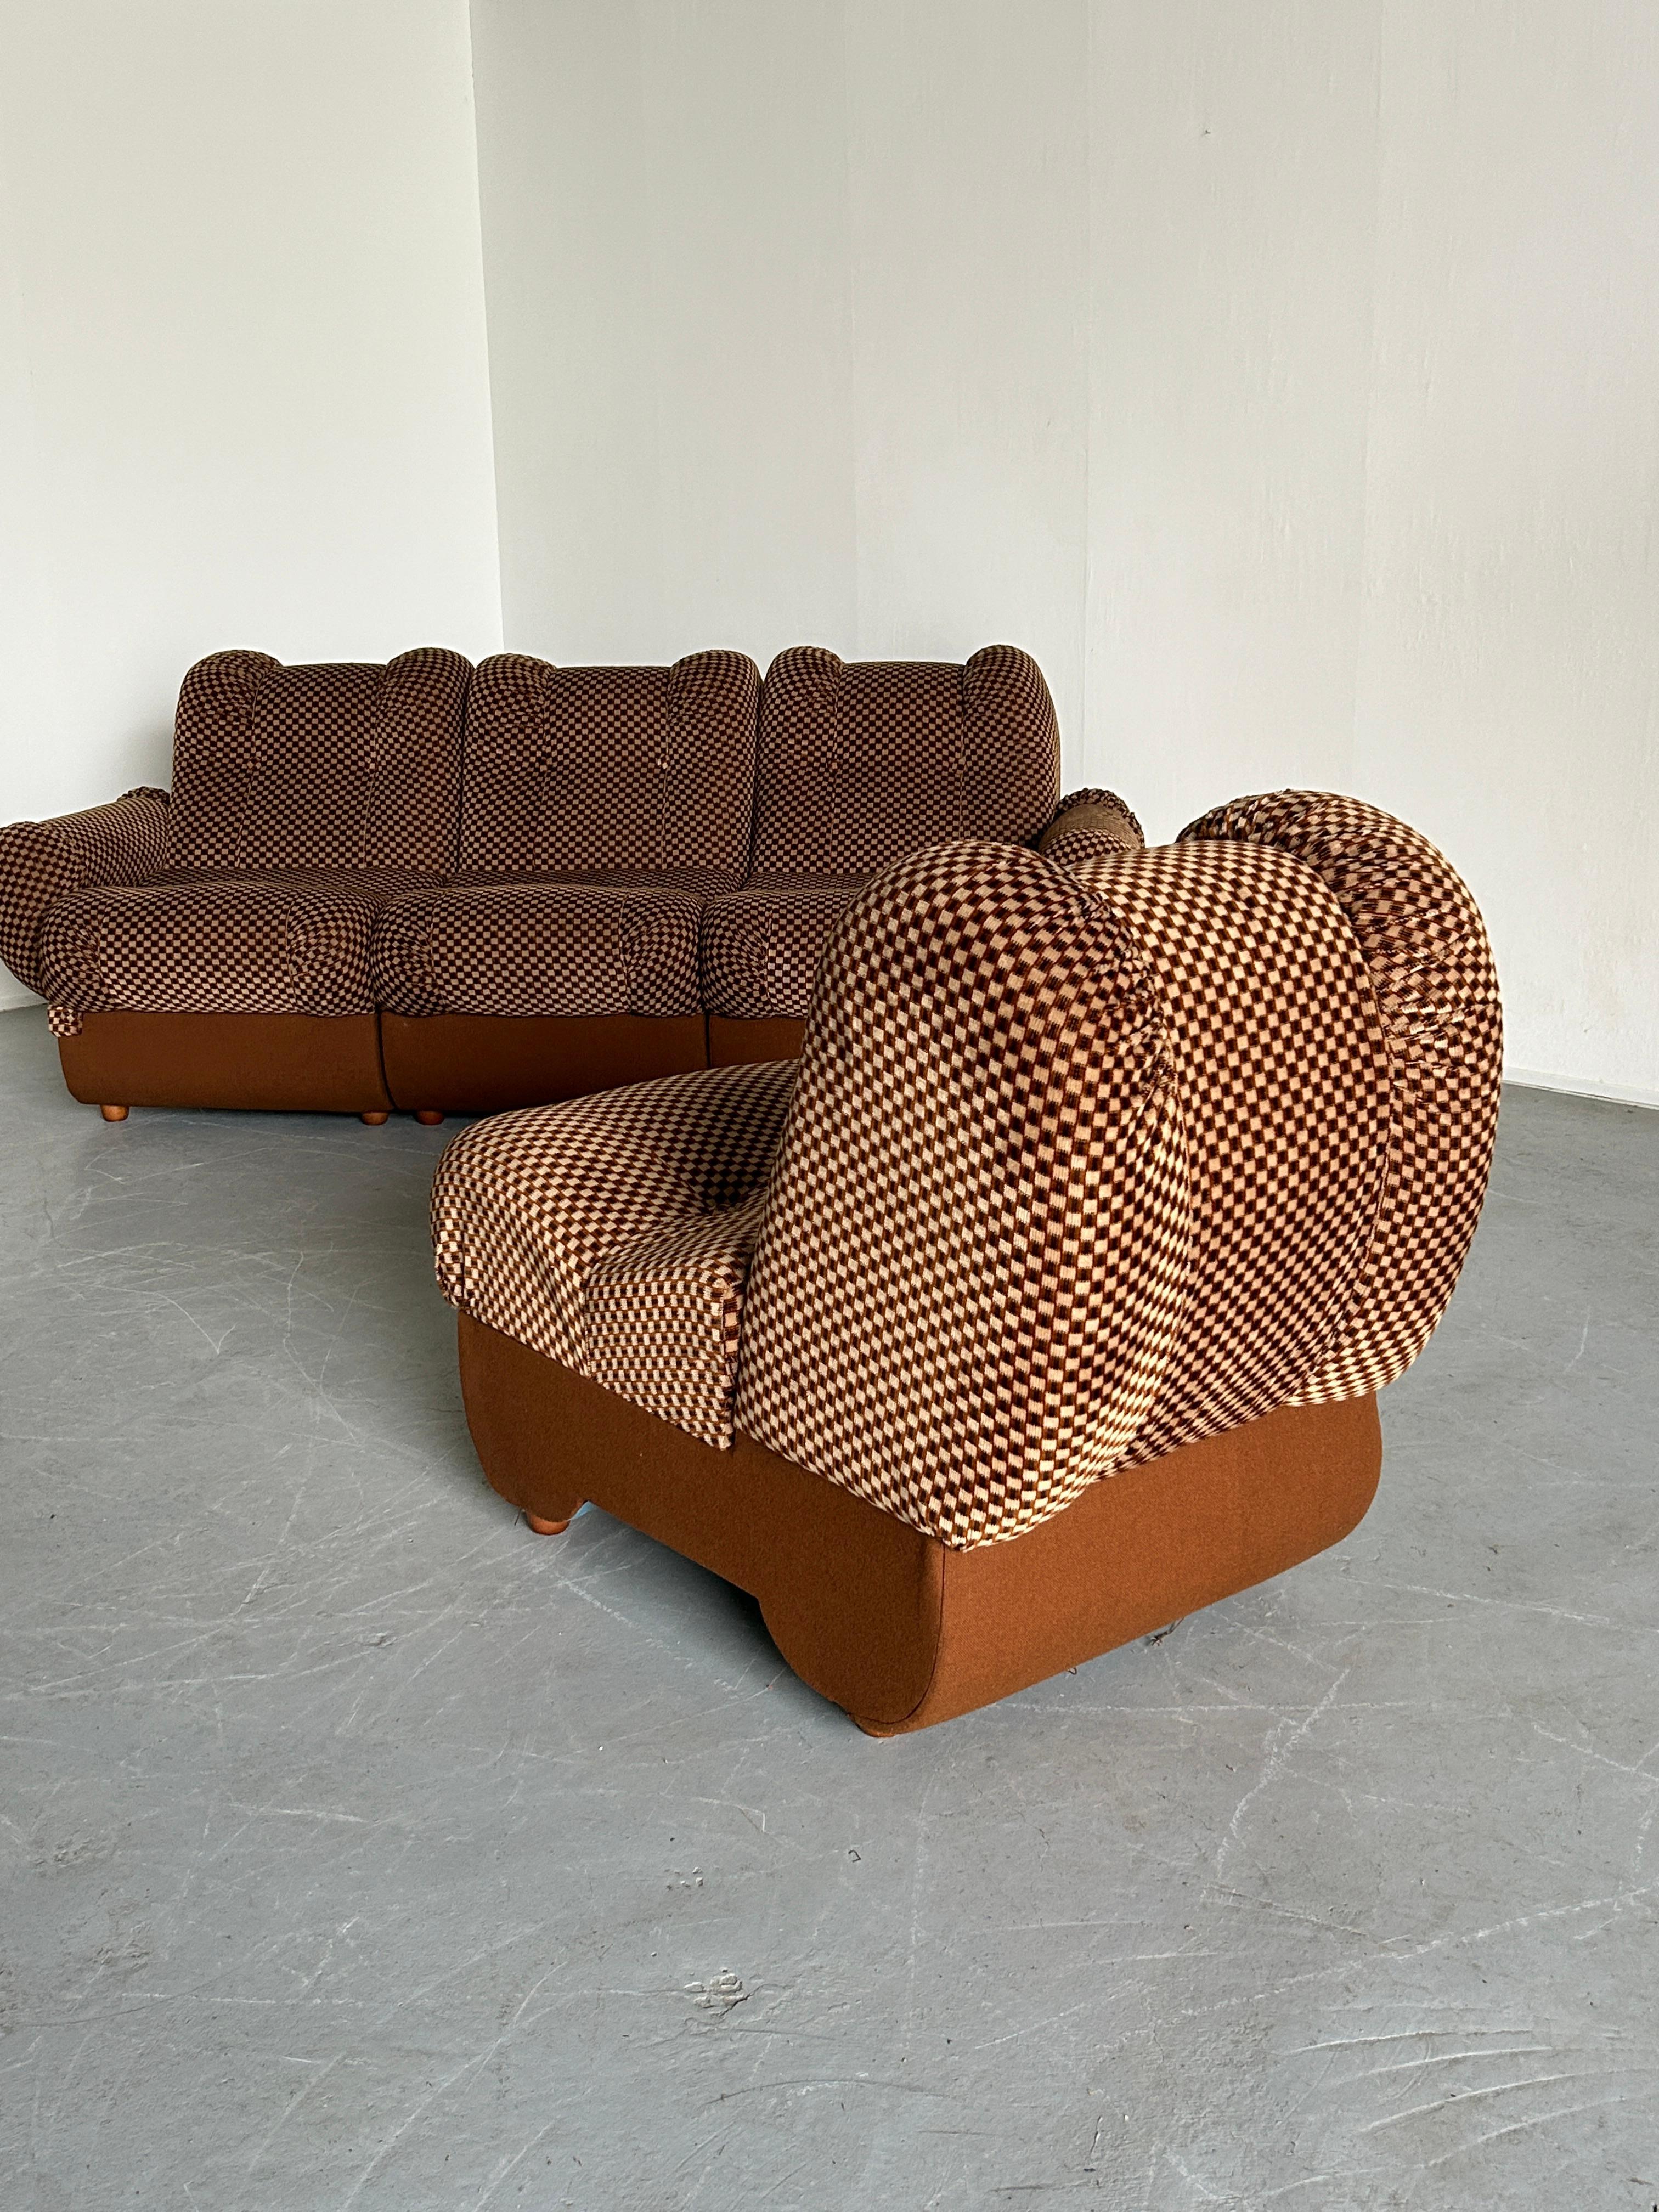 Large Space Age Cloud Modular Sofa Set in Brown Striped Fabric, Italy 1960s For Sale 1